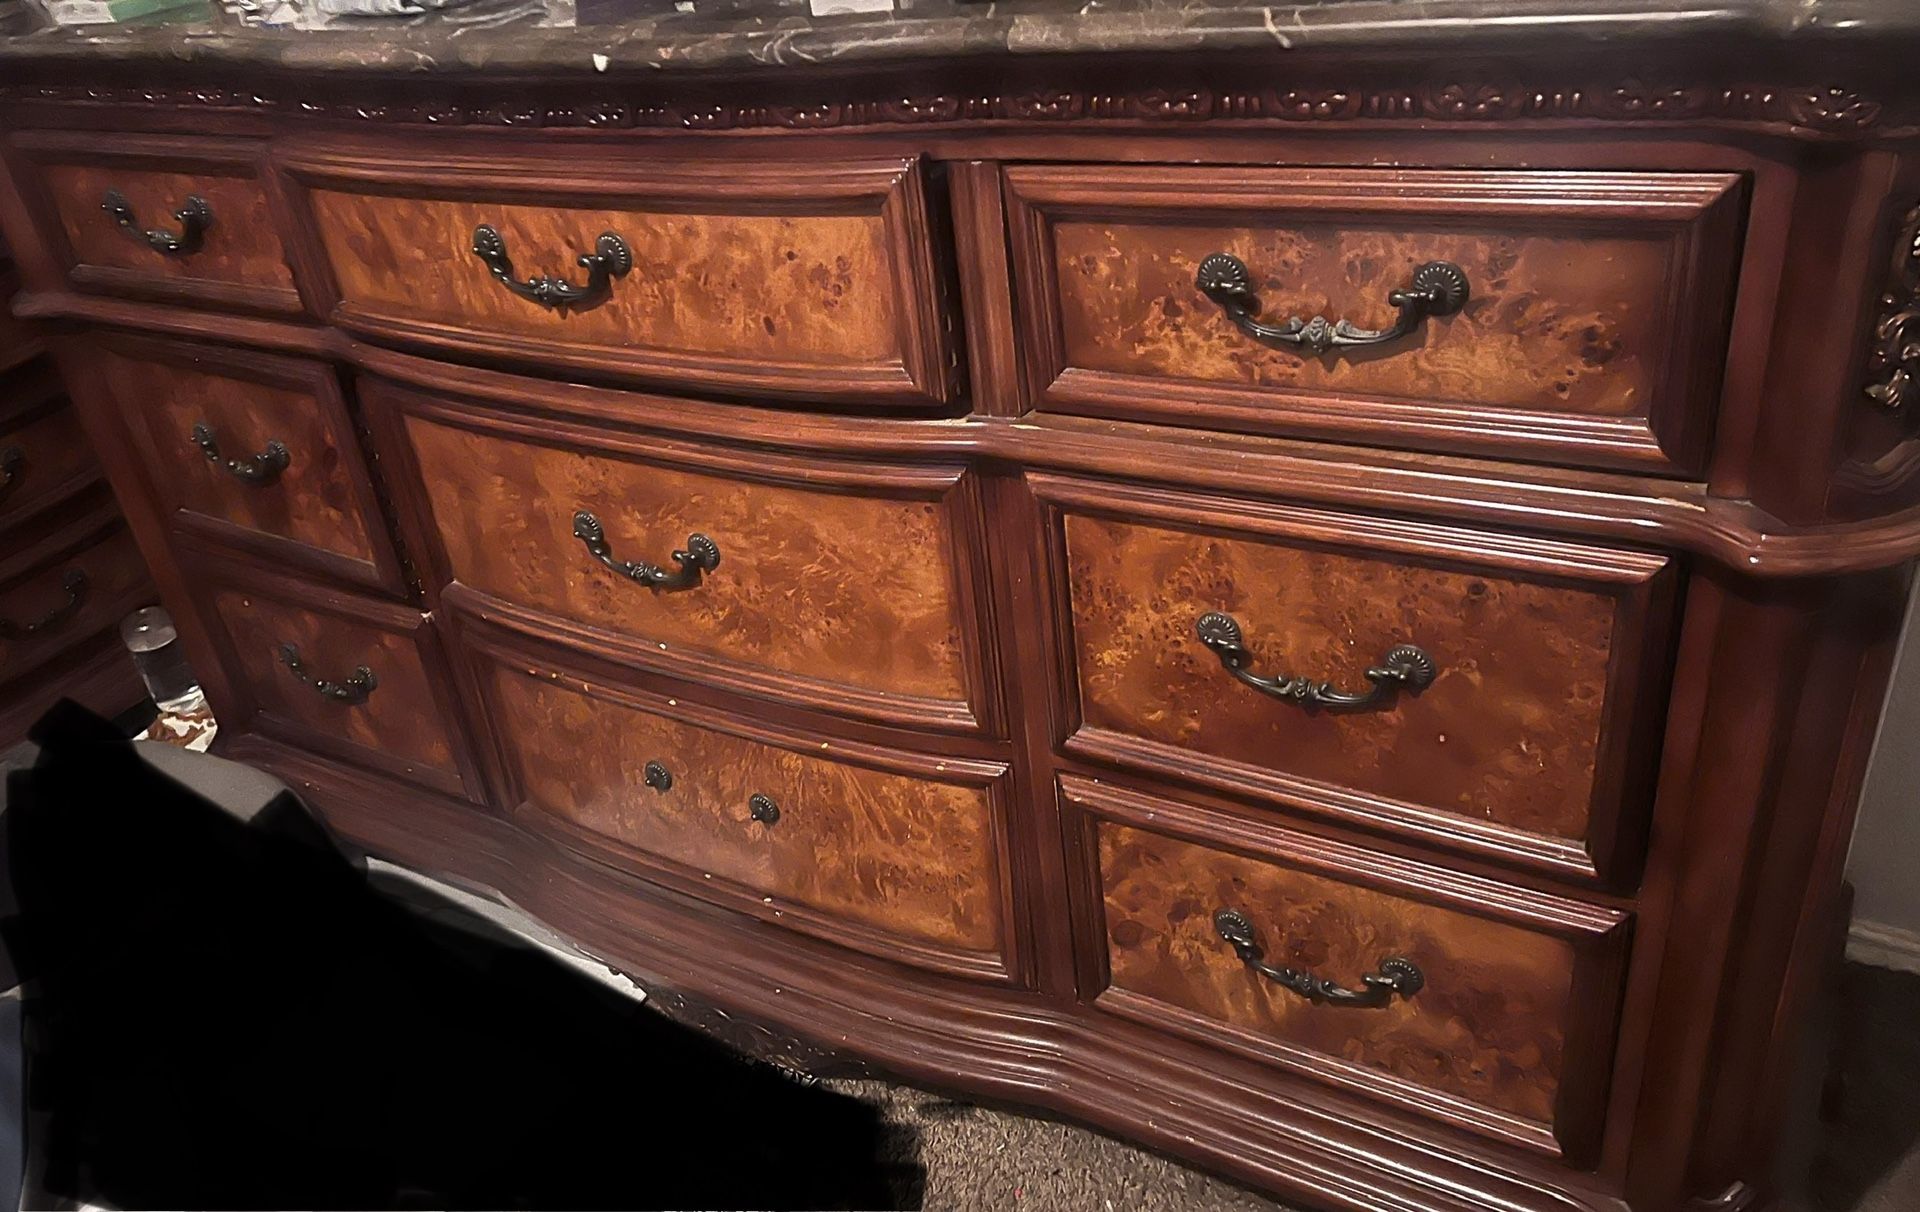 Brown Marble Top Dresser, Good Condition Just Too Big For My Room So I Am Selling It